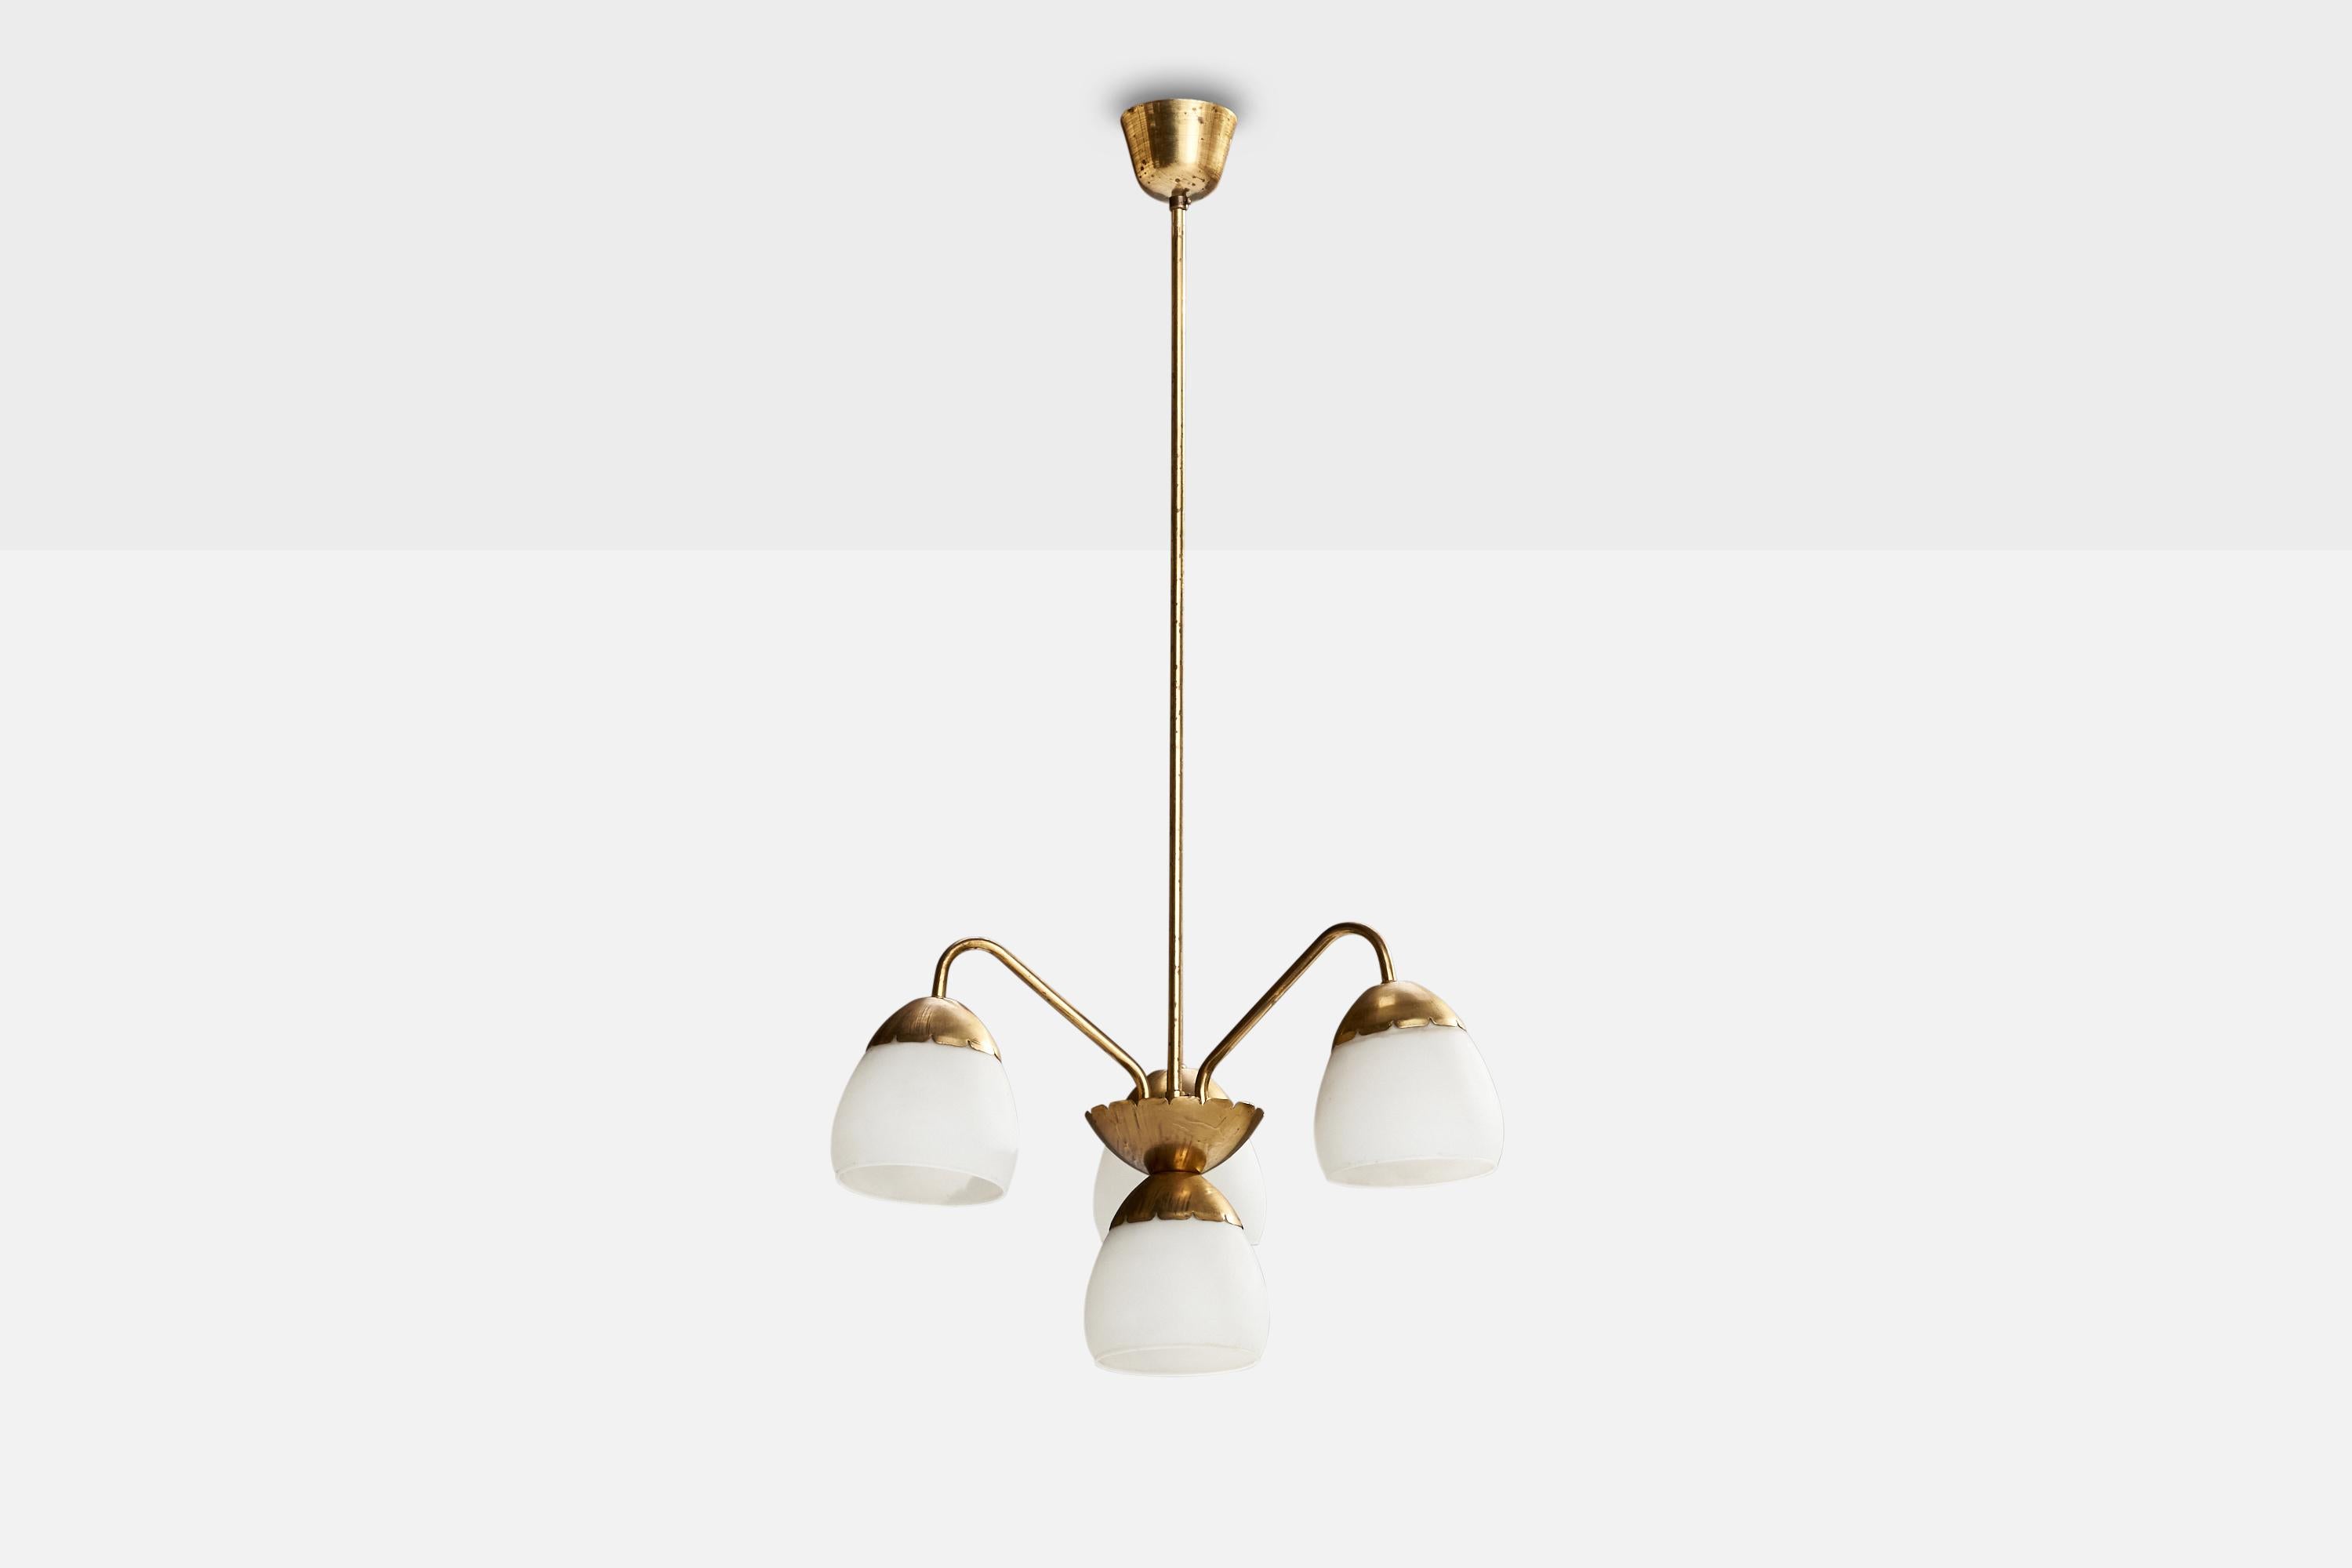 A brass and opaline glass chandelier designed and produced by Valinte OY, Finland, 1950s.

Dimensions of canopy (inches): 2.75” H x 3.36” Diameter
Socket takes standard E-26 bulbs. 4 socket.There is no maximum wattage stated on the fixture. All